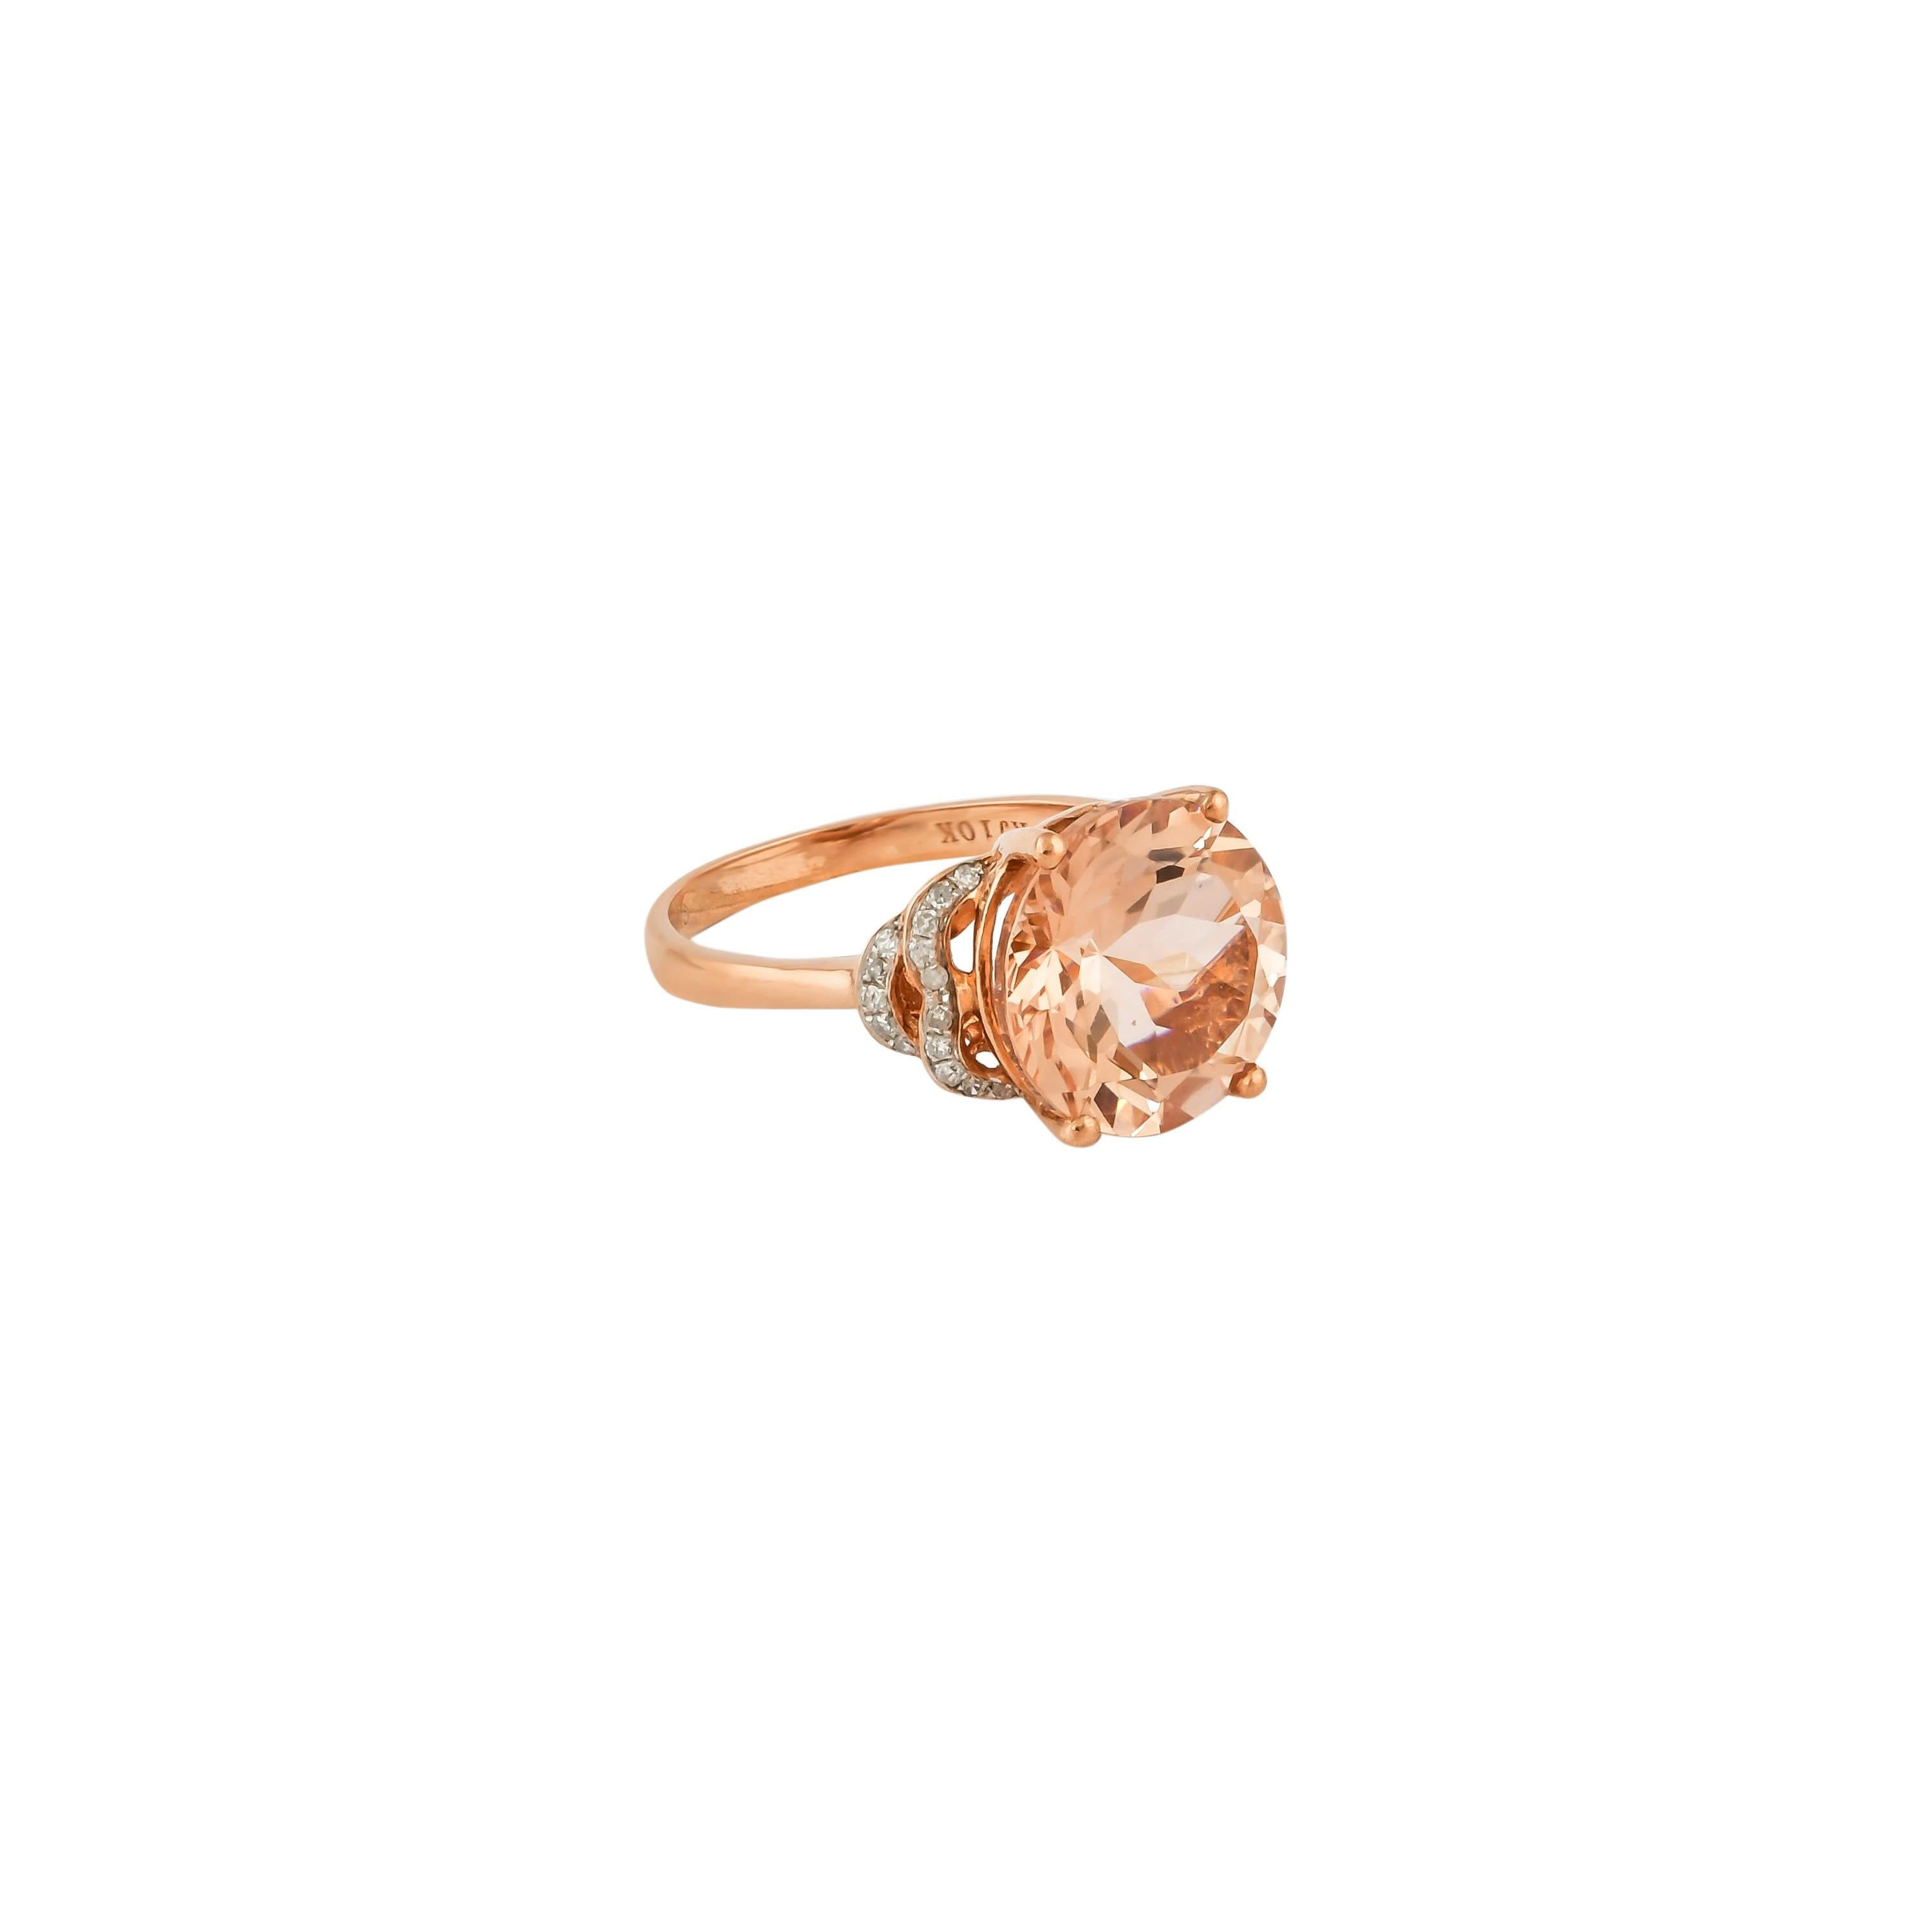 This collection features an array of magnificent morganites! Accented with diamonds these rings are made in rose gold and present a classic yet elegant look. 

Classic morganite ring in 18K rose gold with diamonds. 

Morganite: 6.25 carat round